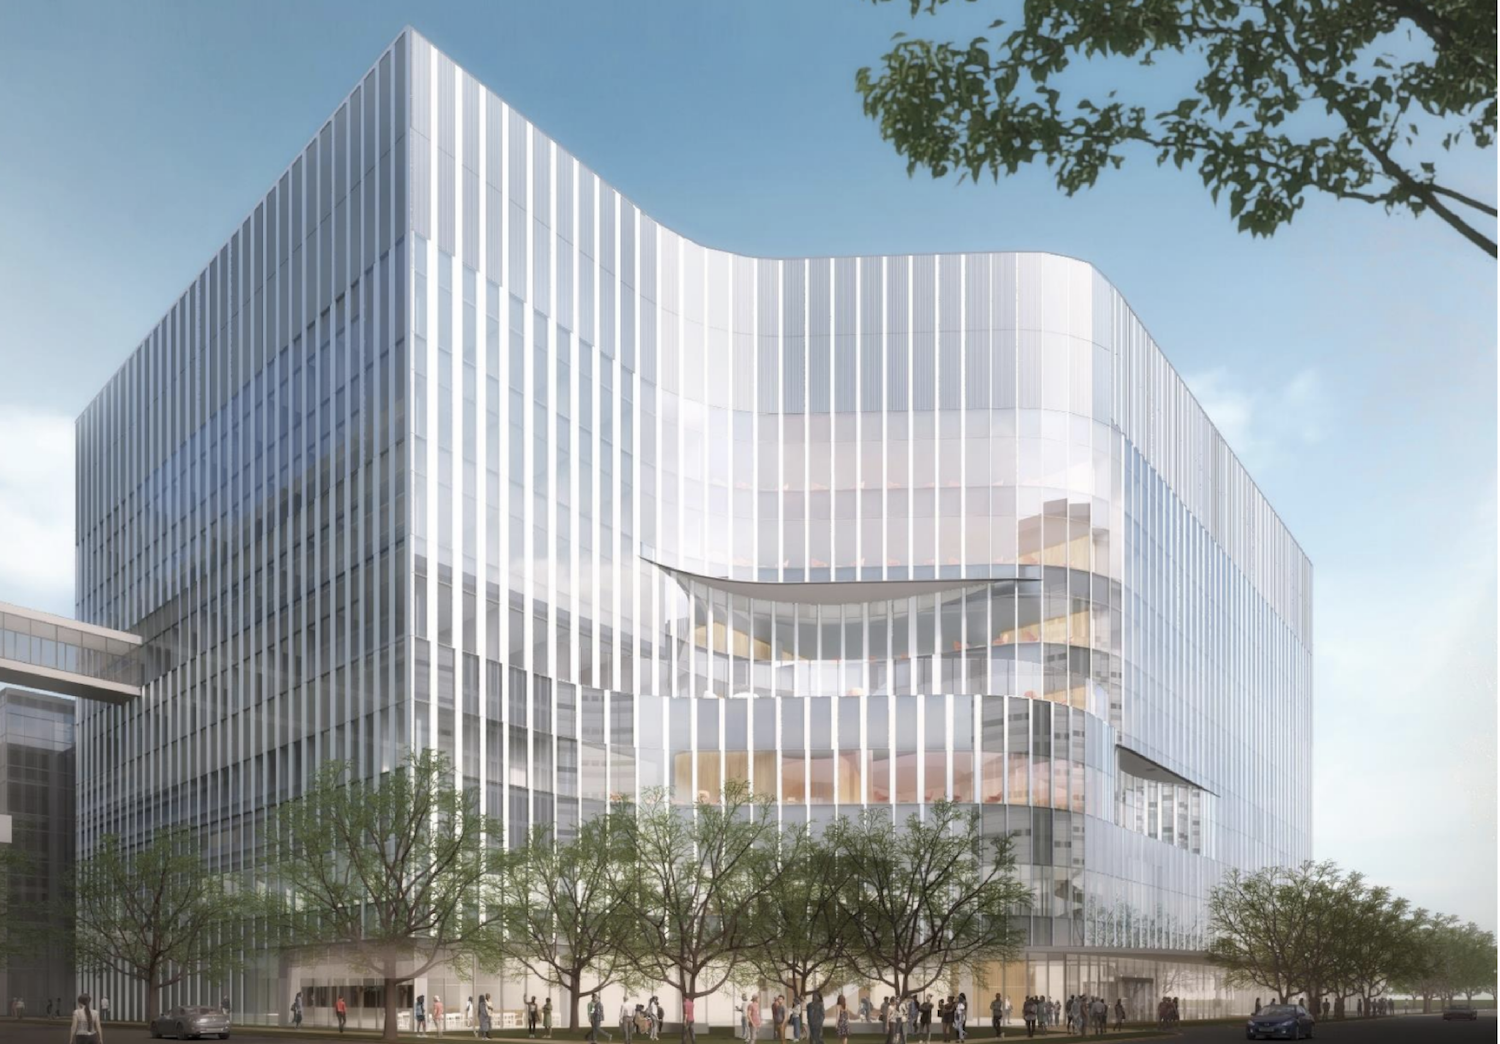 Rendering of the new University of Chicago Cancer Center, by CannonDesign